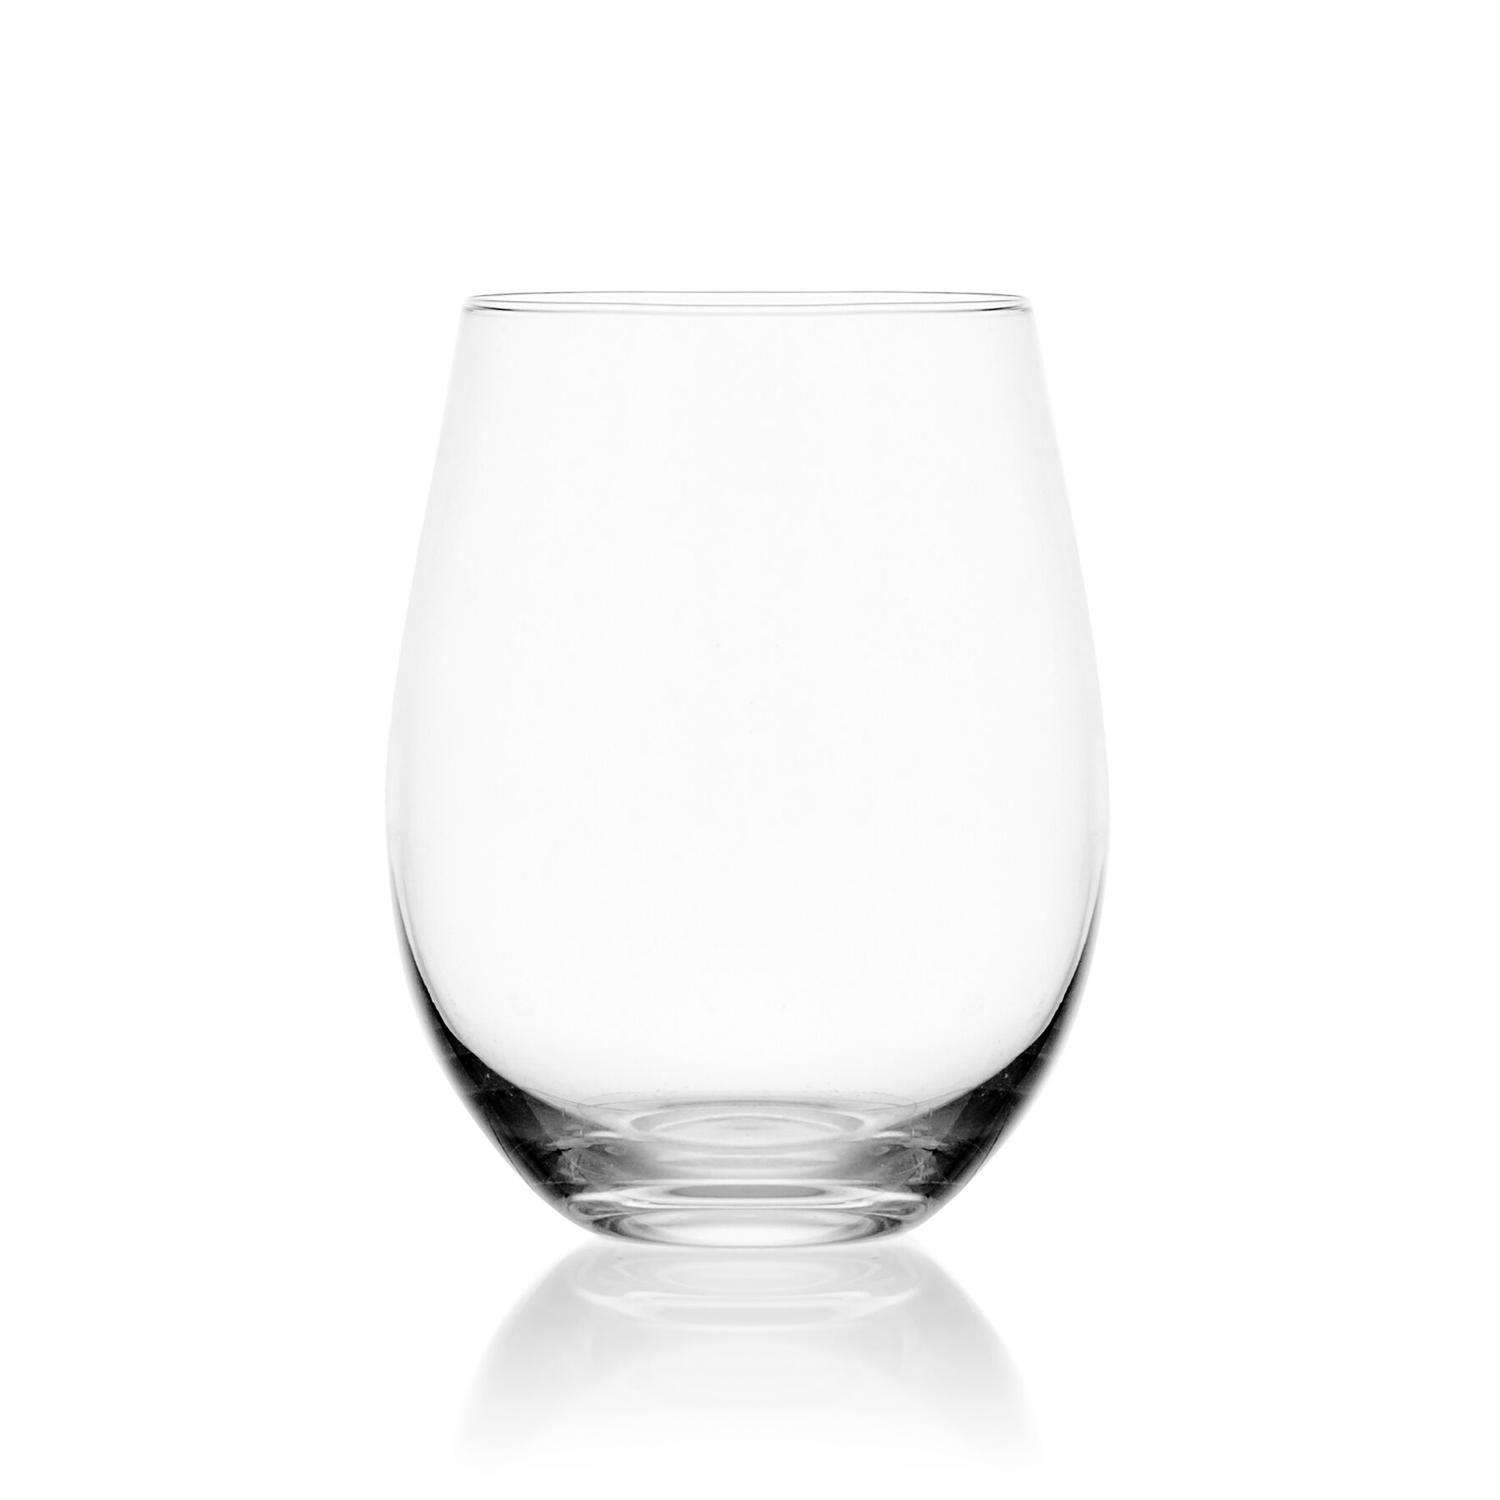 Smarty Had A Party 8 oz. Crystal Cut Plastic Wine Glasses (48 Glasses)